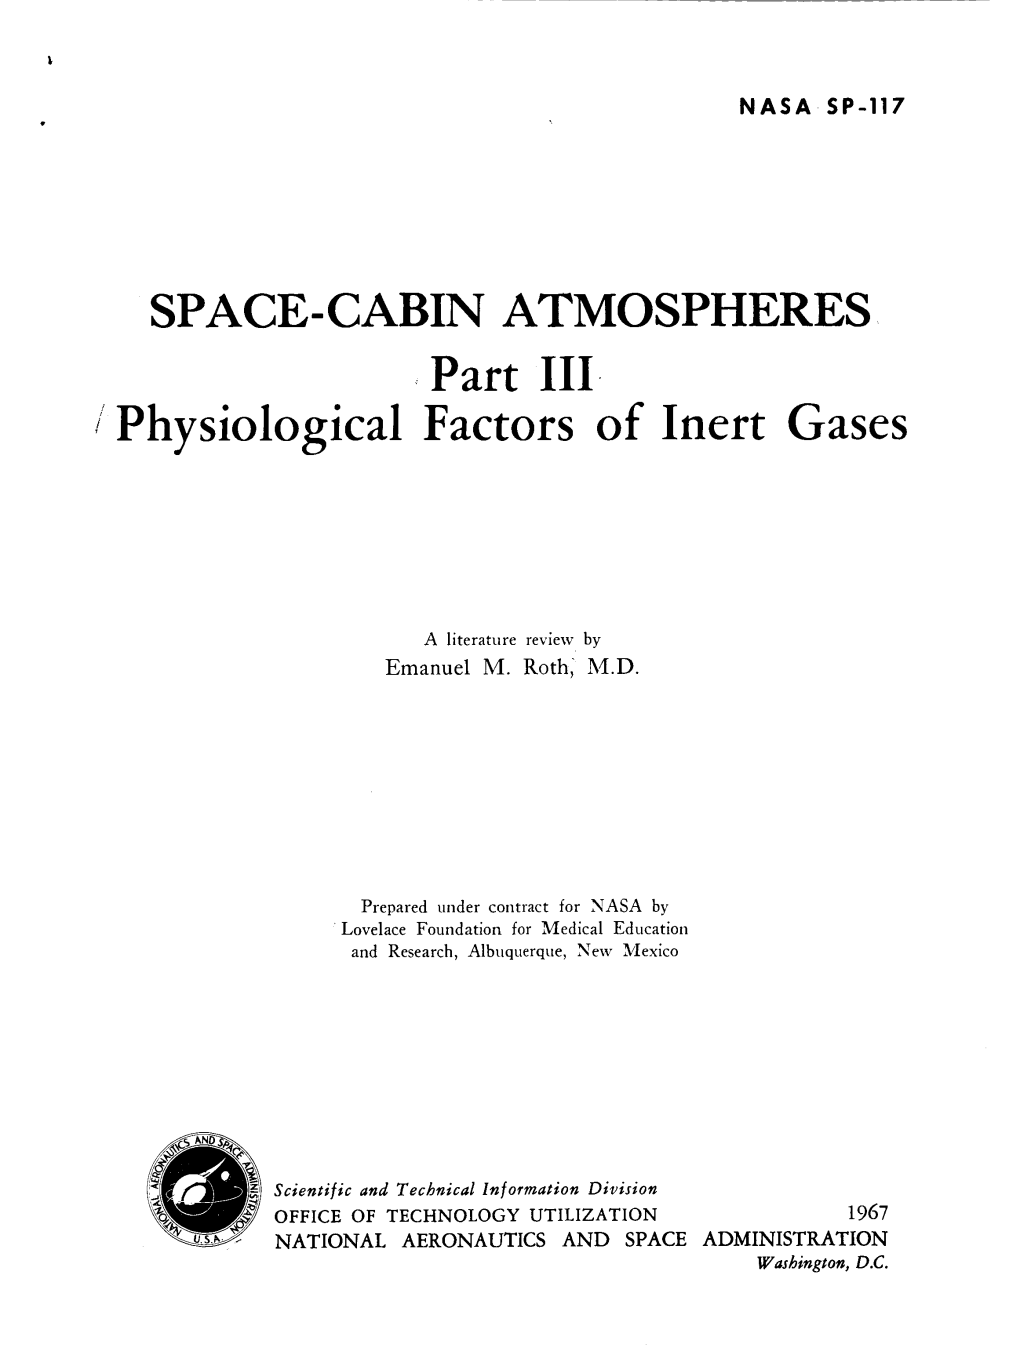 SPACE-CABIN ATMOSPHERES Part III /Physiological Factors of Inert Gases